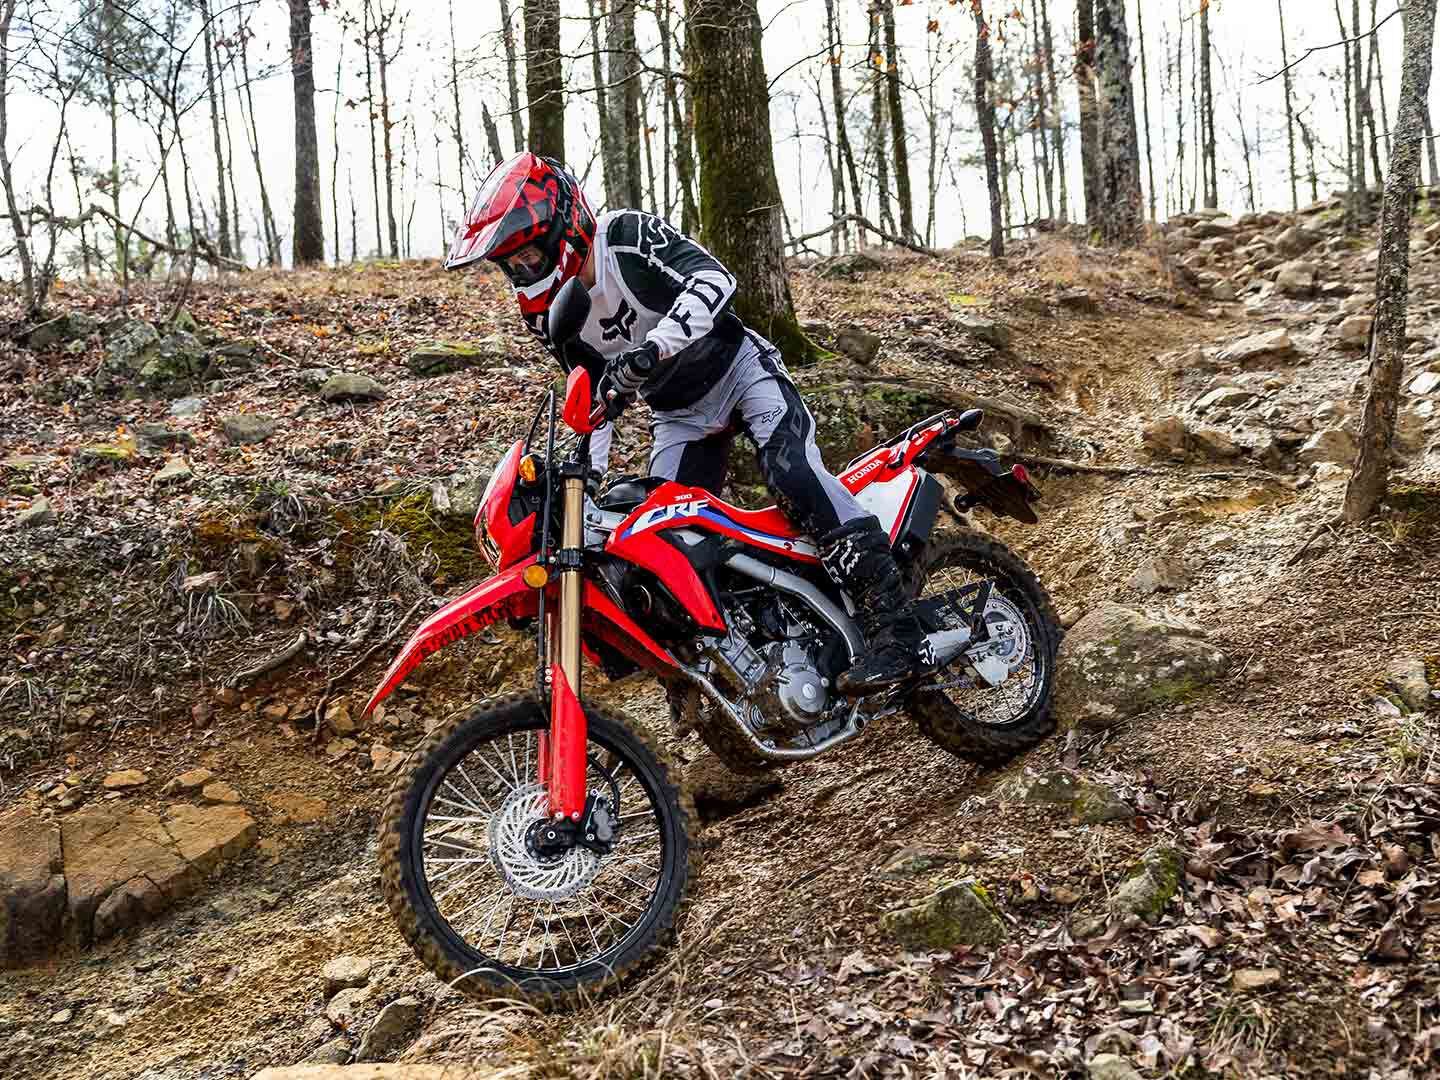 The 2023 CRF300L lineup expands by one. Now the CRF300L (shown) and its ABS version are joined by the CRF300LS.